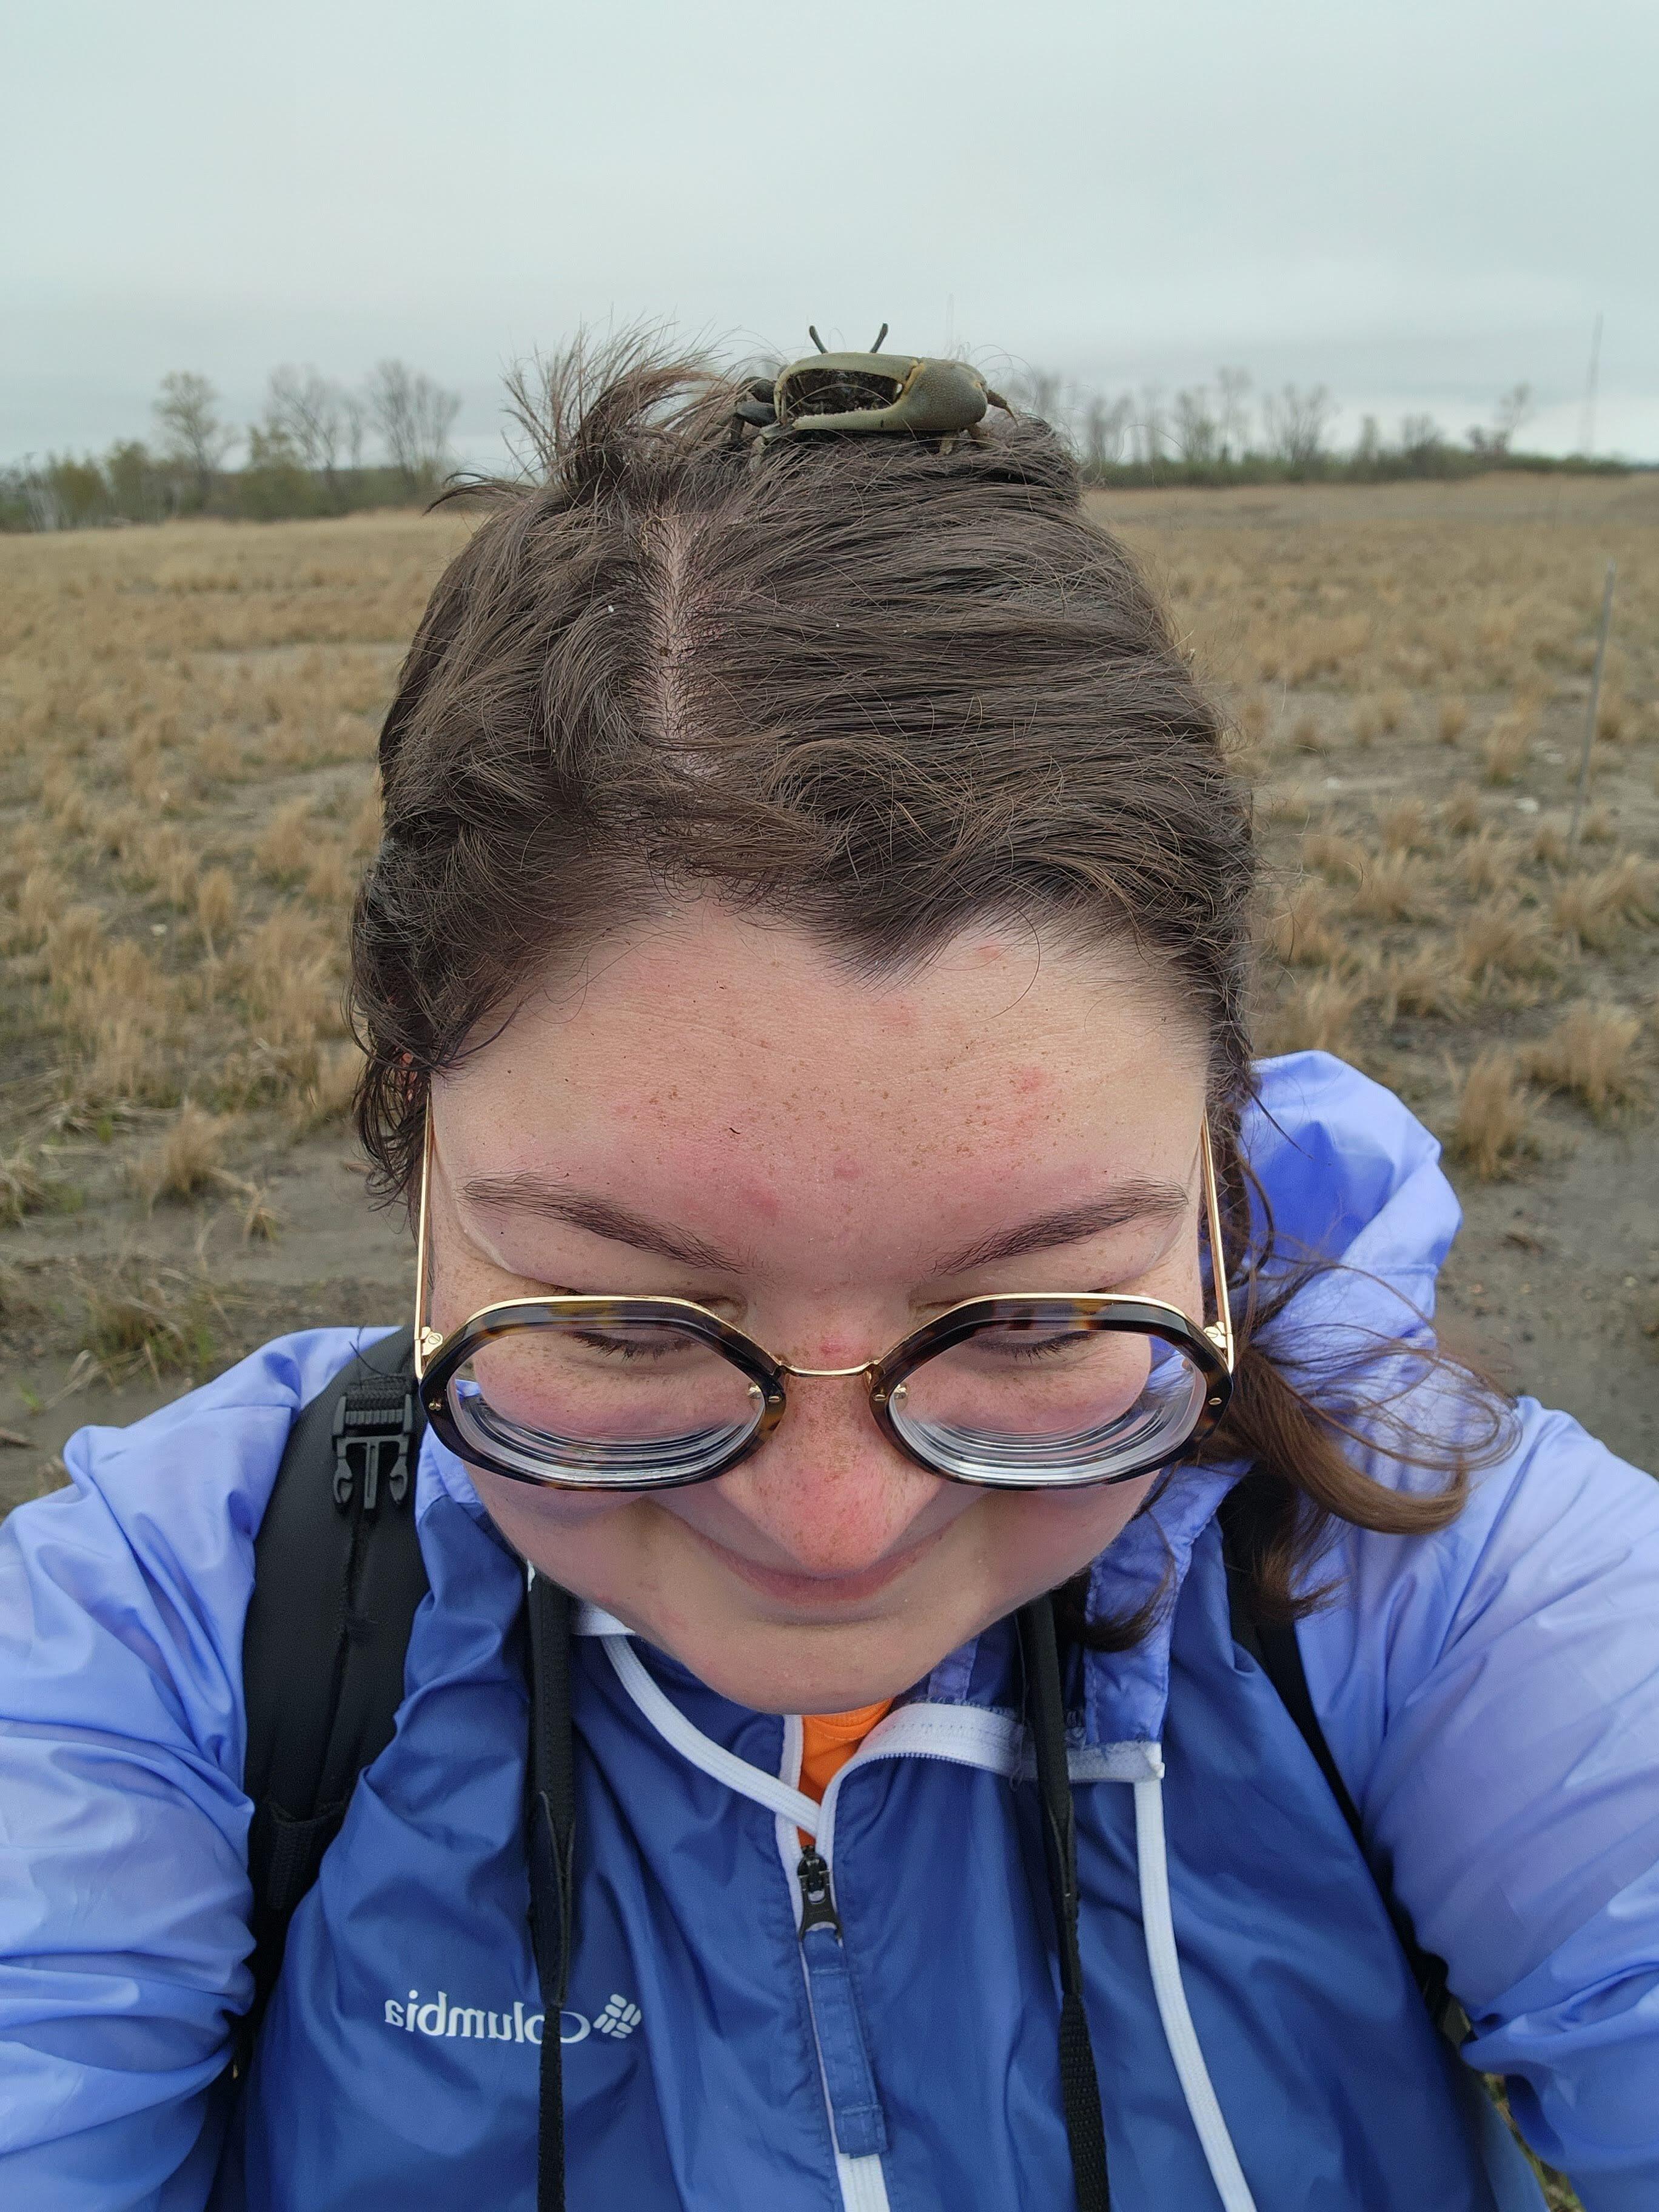 A selfie of Allison Middlemass out on the beach on a cloudy day, with a fiddler crab on her hair.